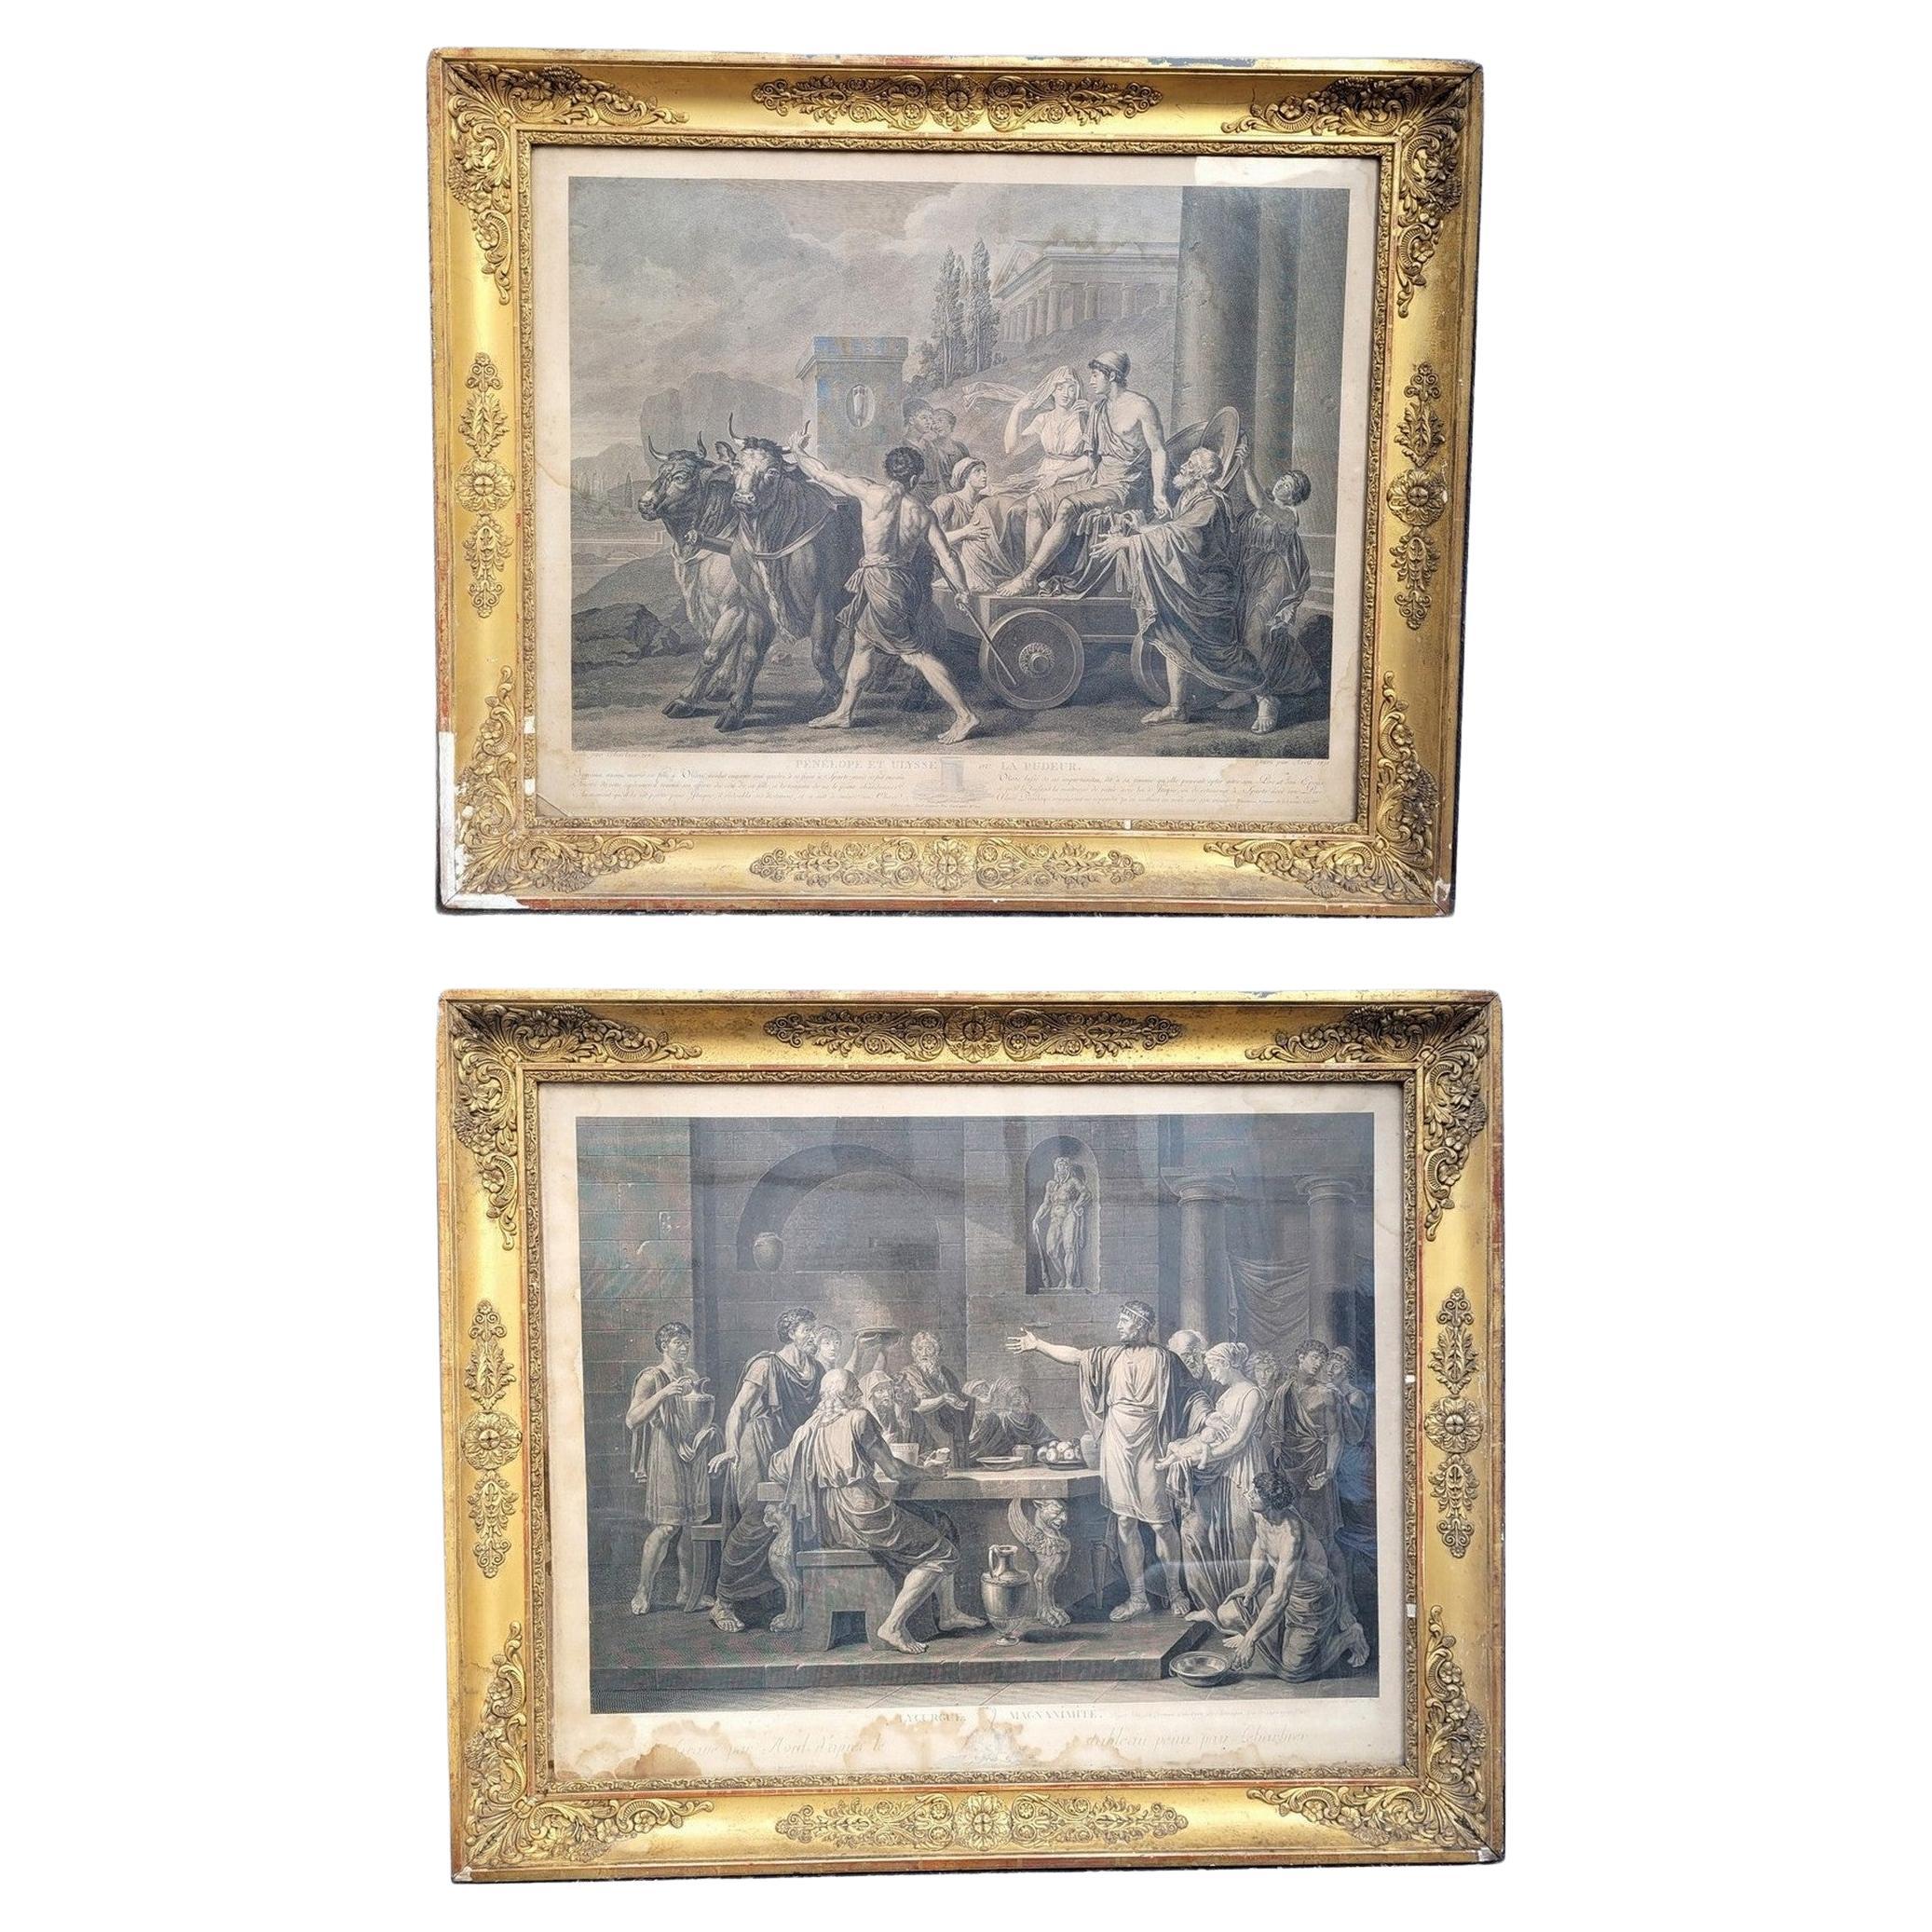 Pair of Framed Neoclassical Engravings, Late 18th Early 19th century